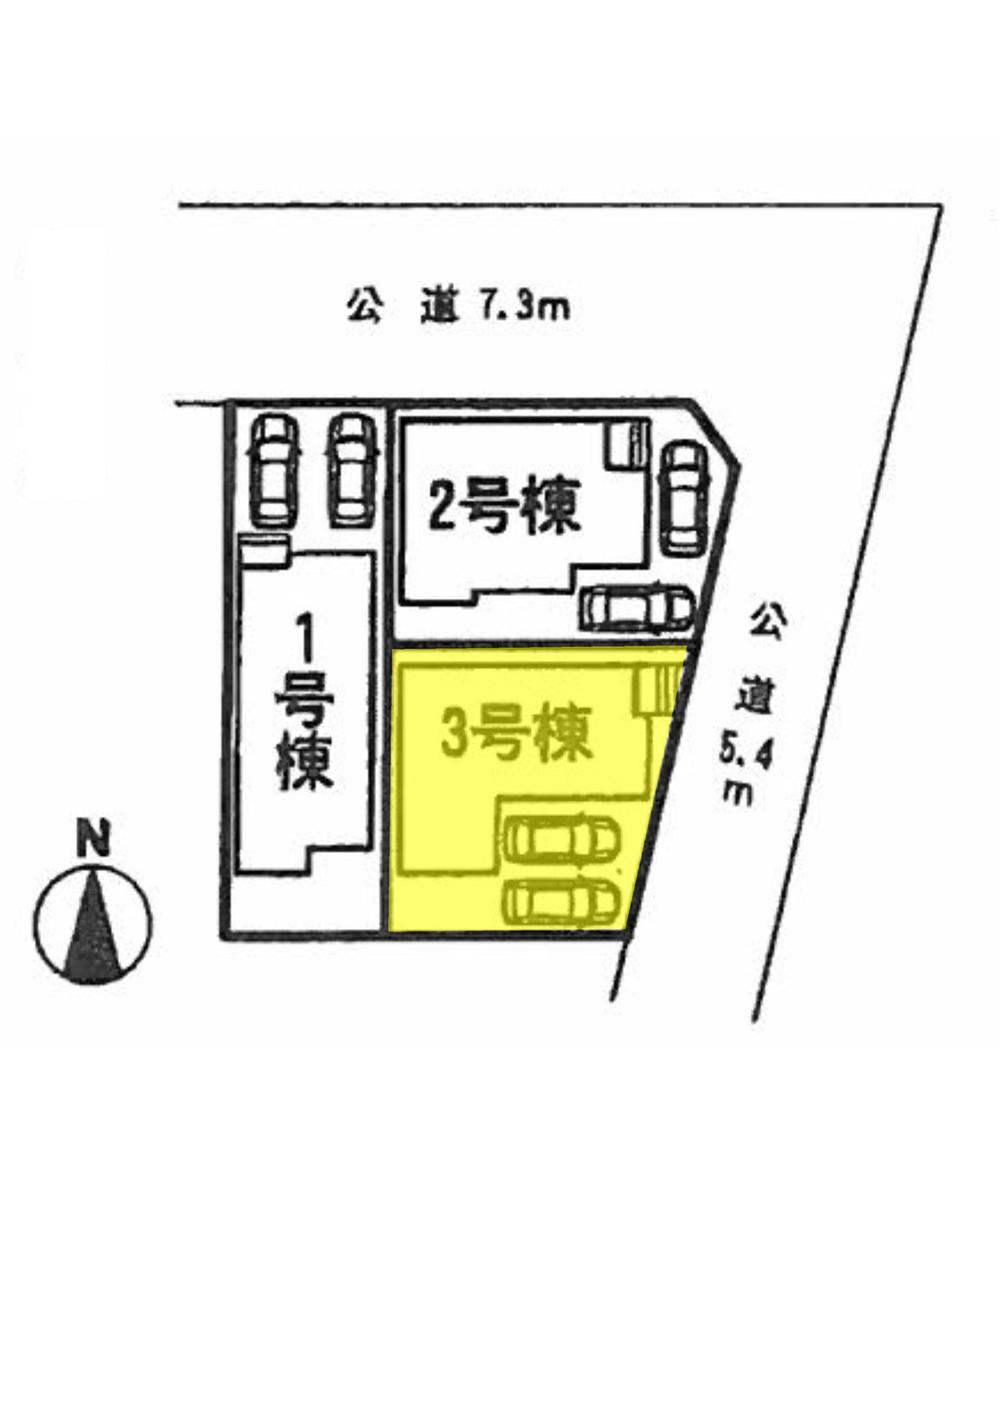 The entire compartment Figure. It will be part of the yellow Building 3. 